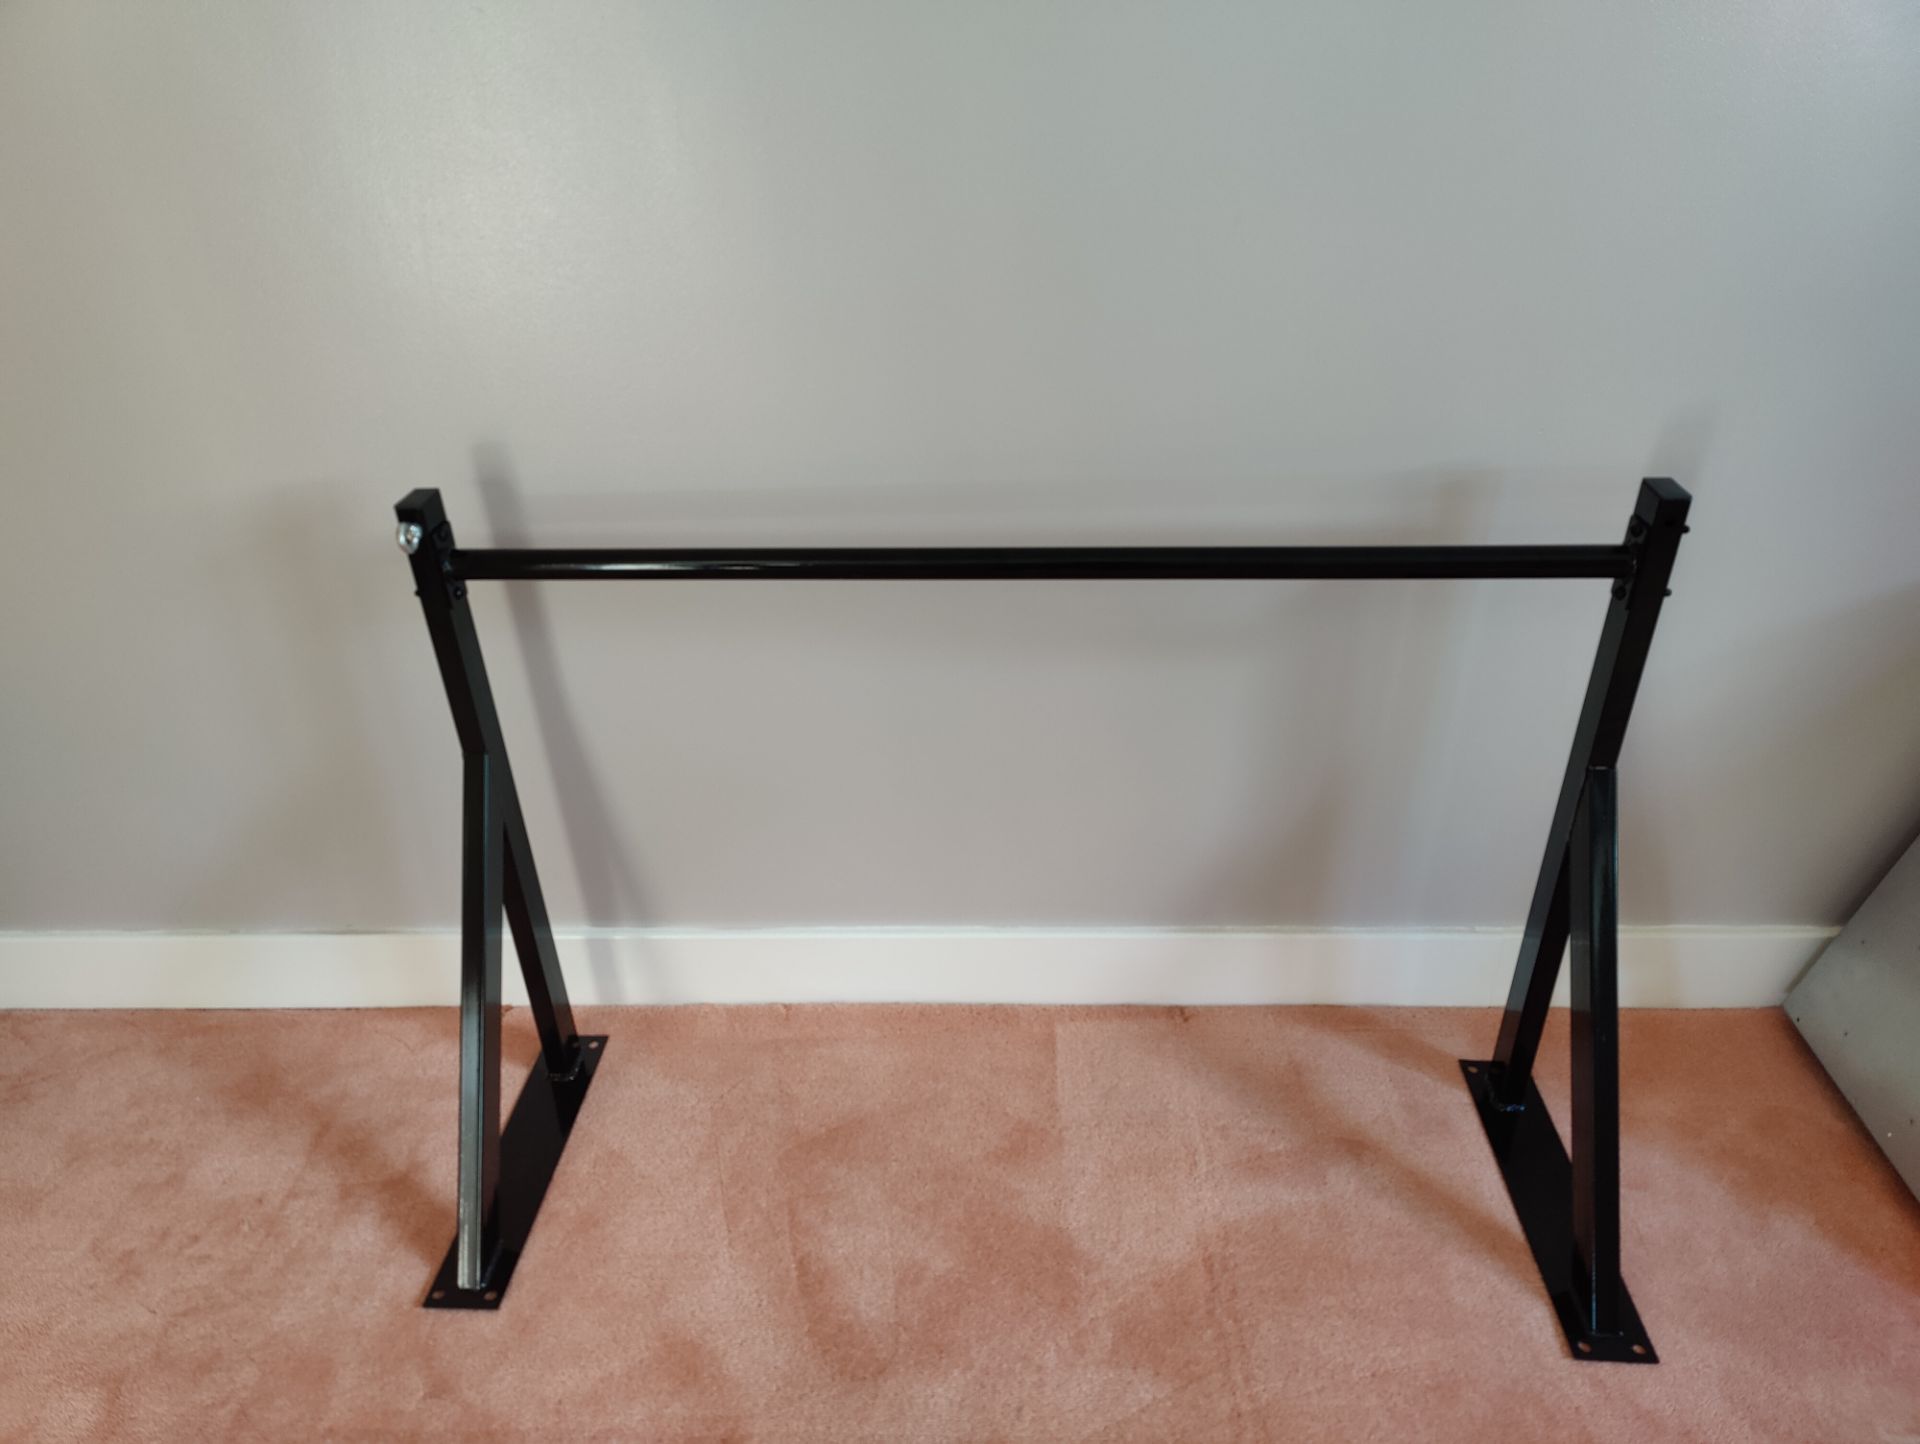 Commercial Gym Wall Mounted Steel Made Pull/Push Chin Up Bar - Bild 3 aus 3